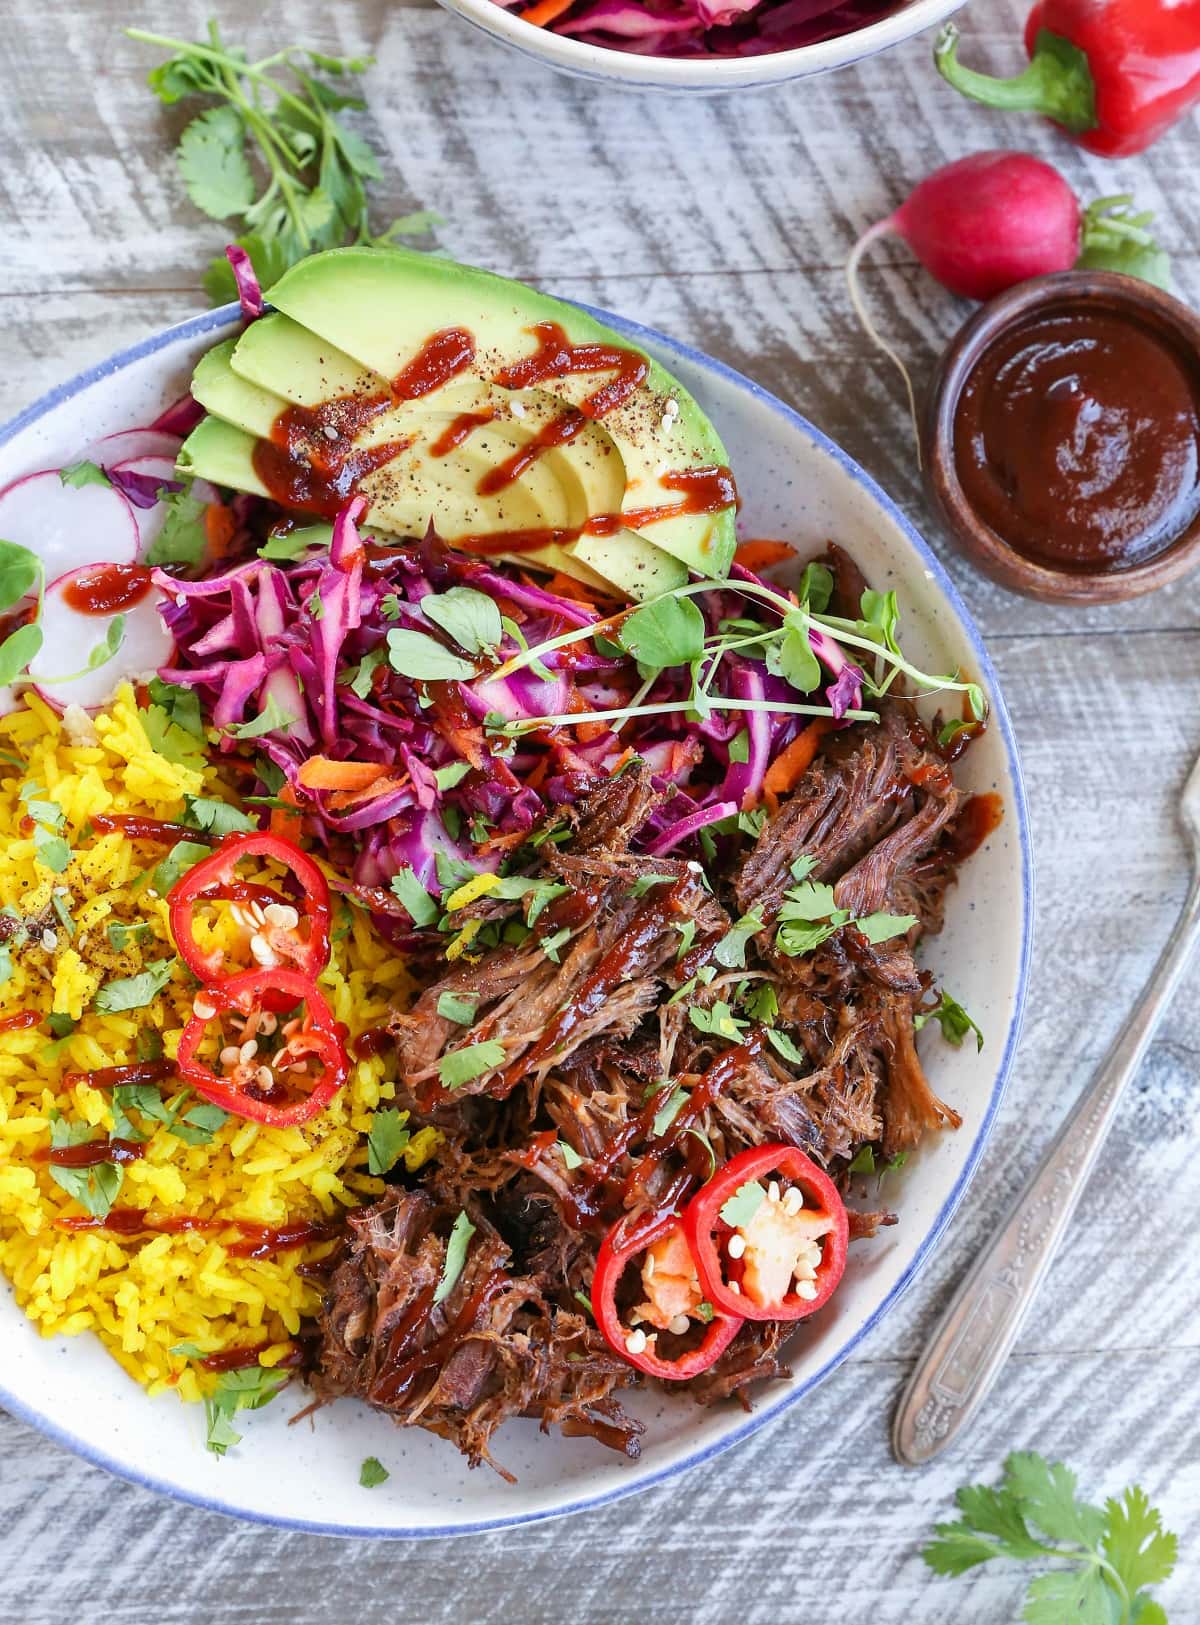 Slow Cooker Barbacoa Beef Burrito Bowls with Turmeric Rice and Cabbage Slaw - gluten-free, paleo, healthy dinner recipe